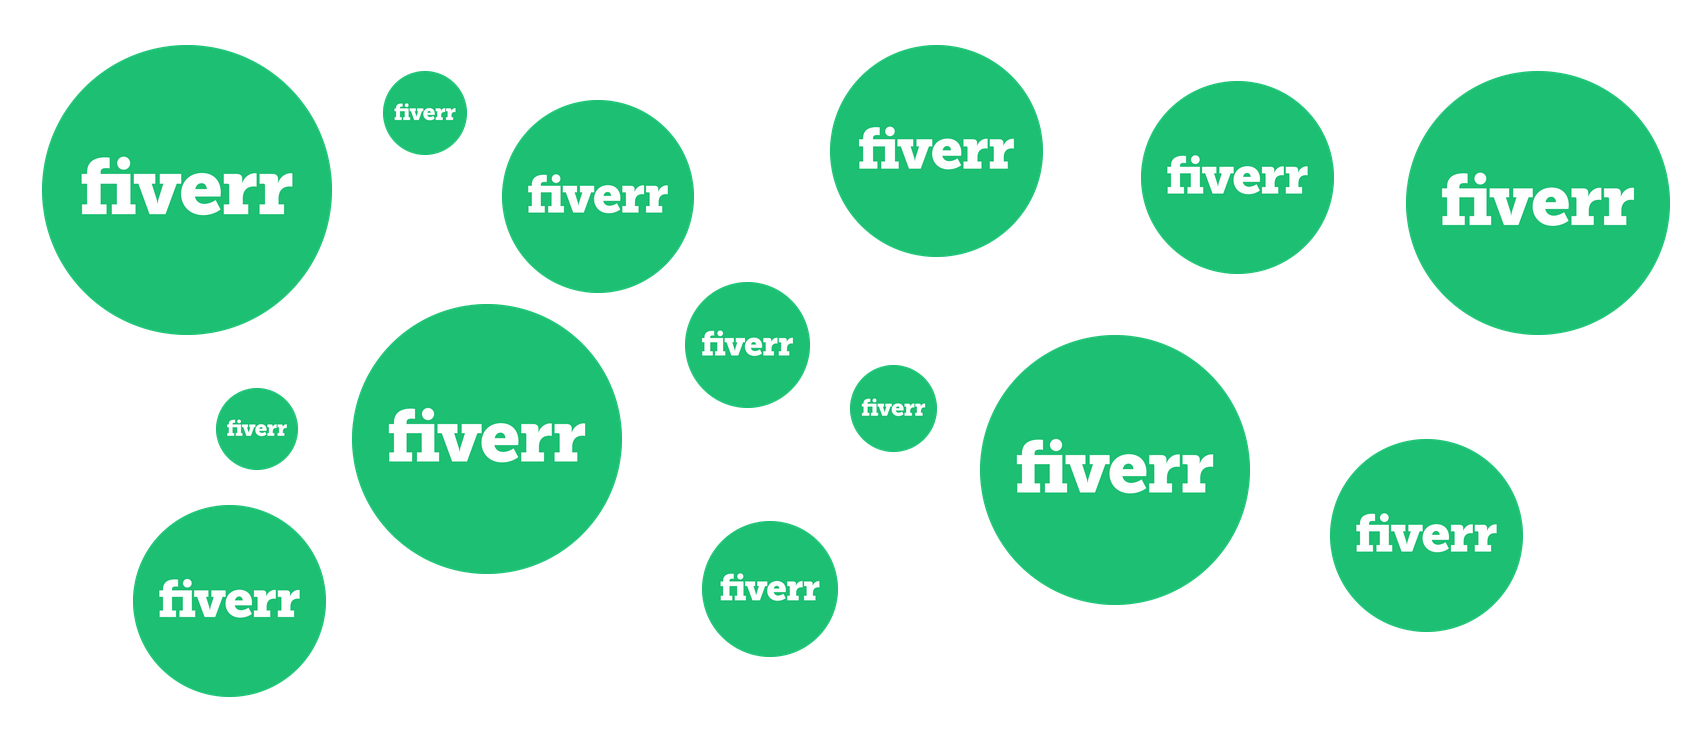 7 Ways to make money on Fiverr easily and successfully